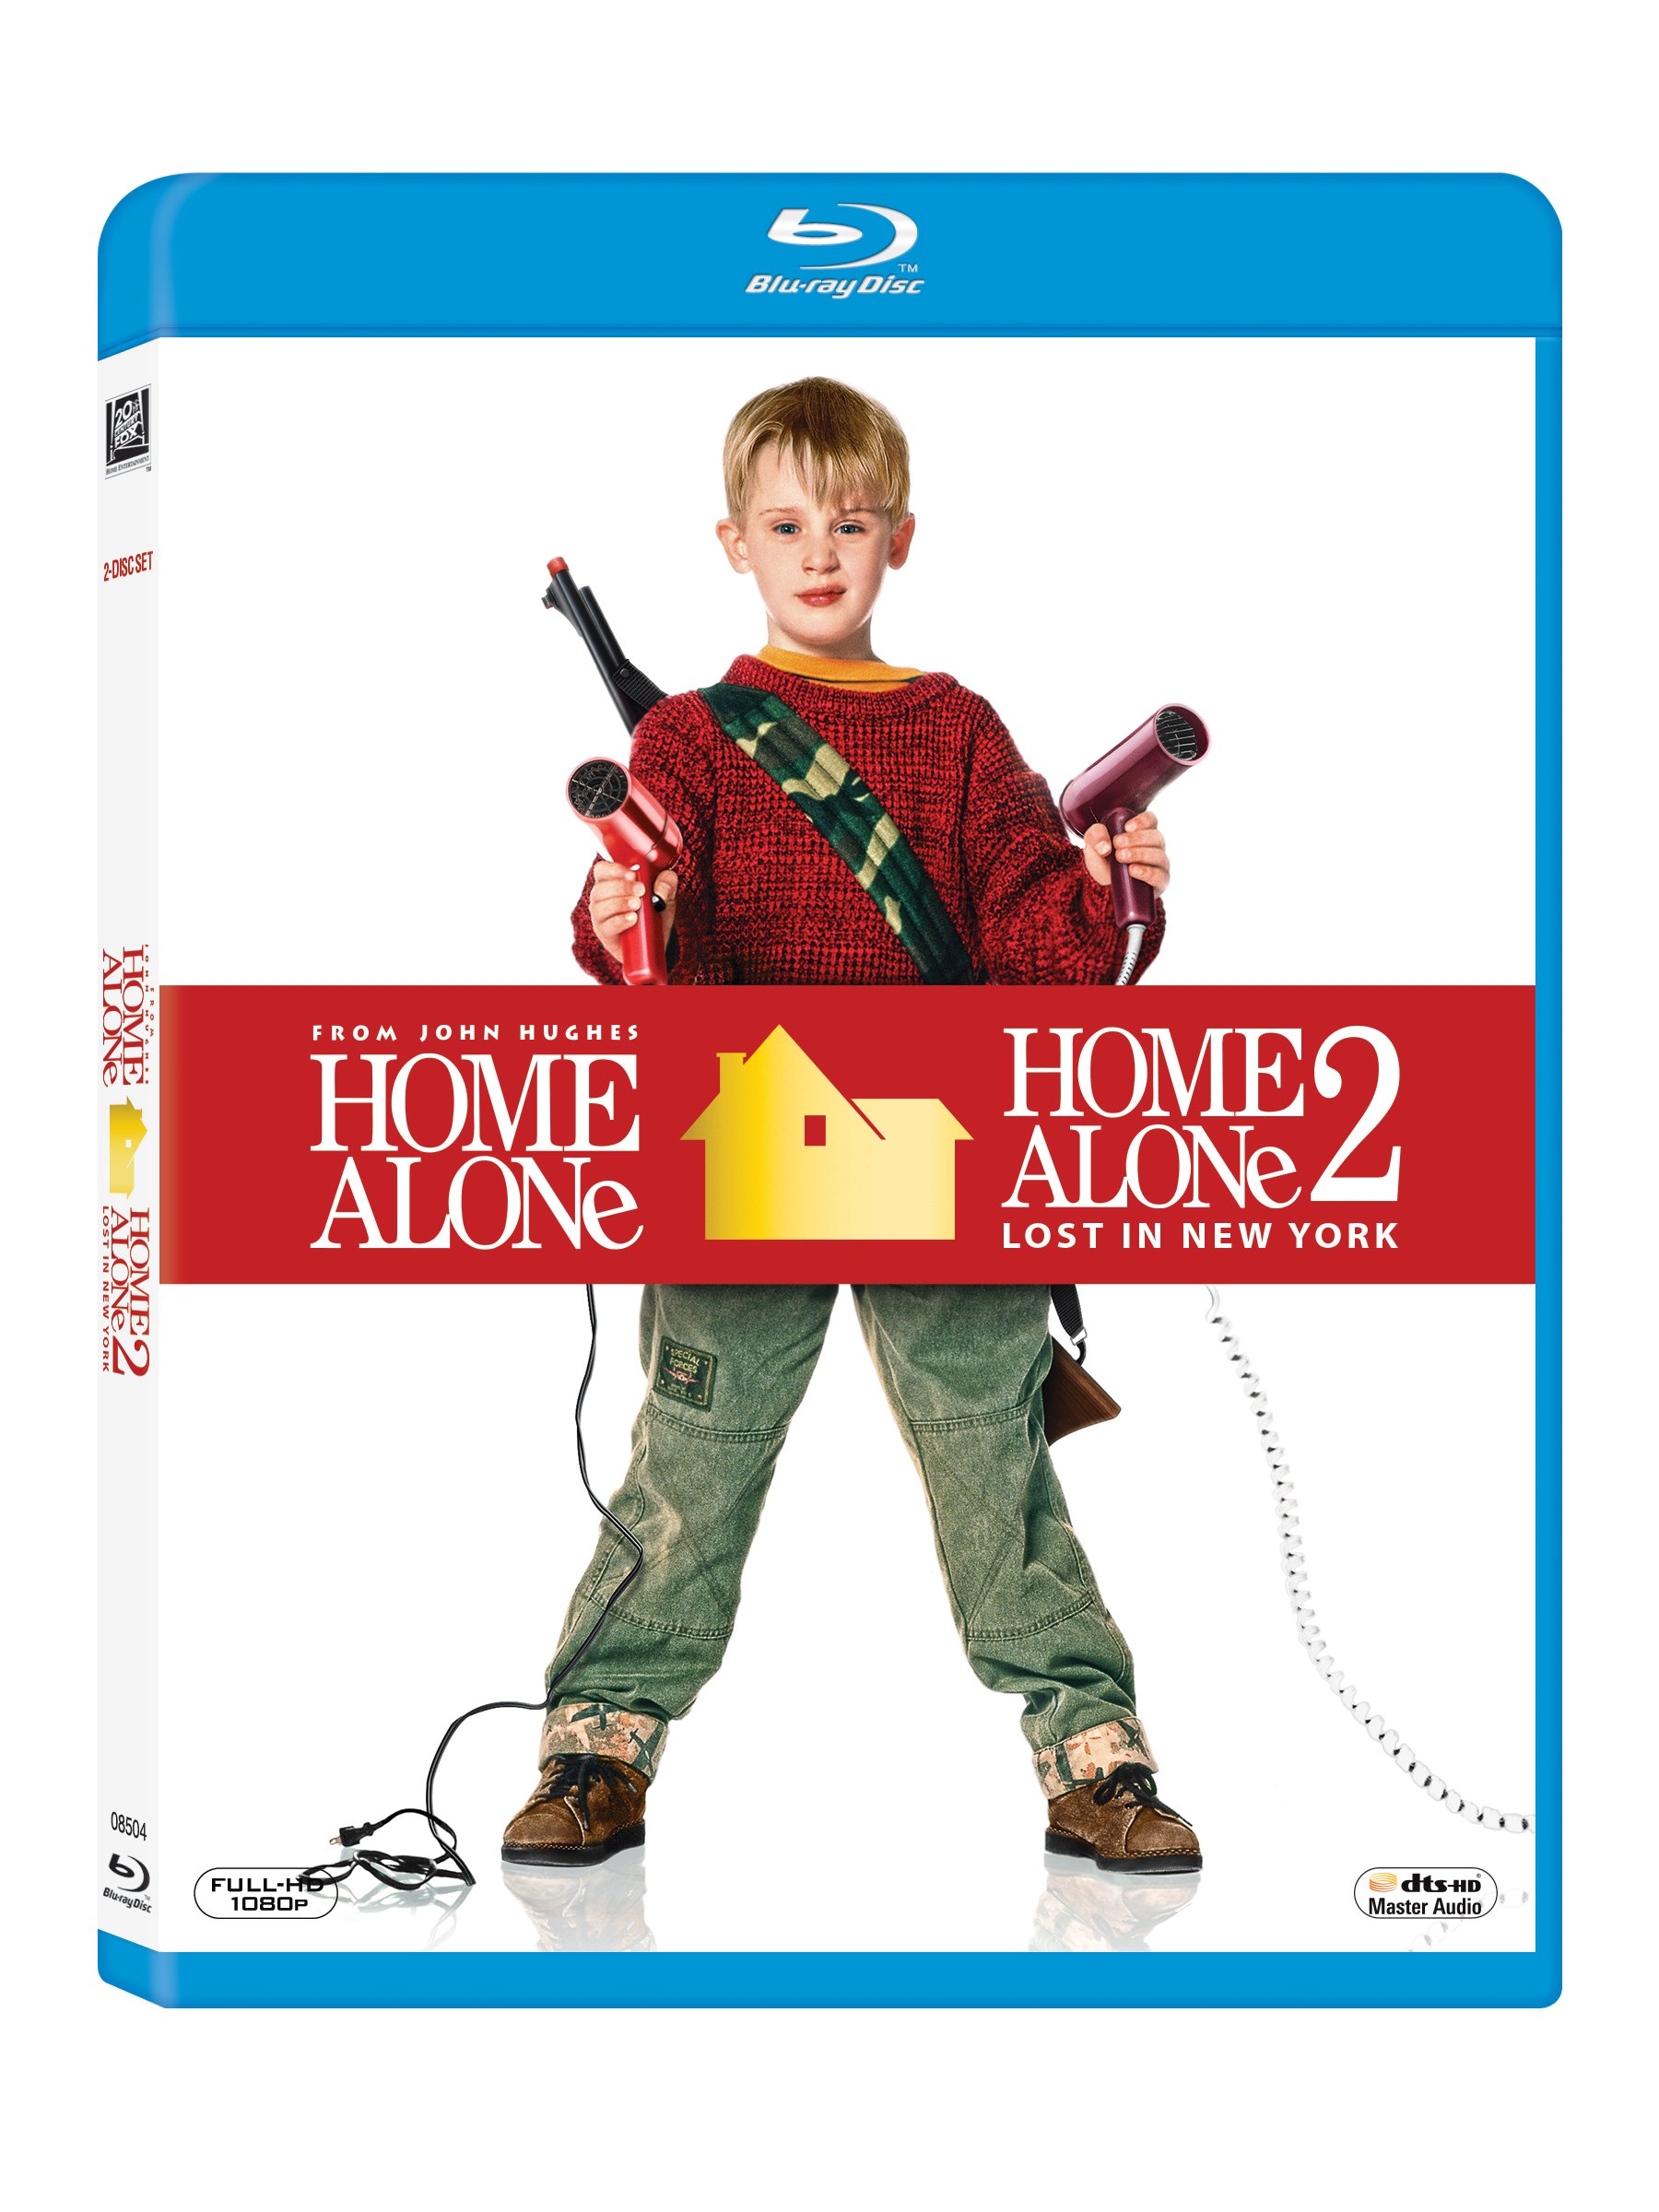 2-movies-collection-home-alone-home-alone-2-lost-in-new-york-movie